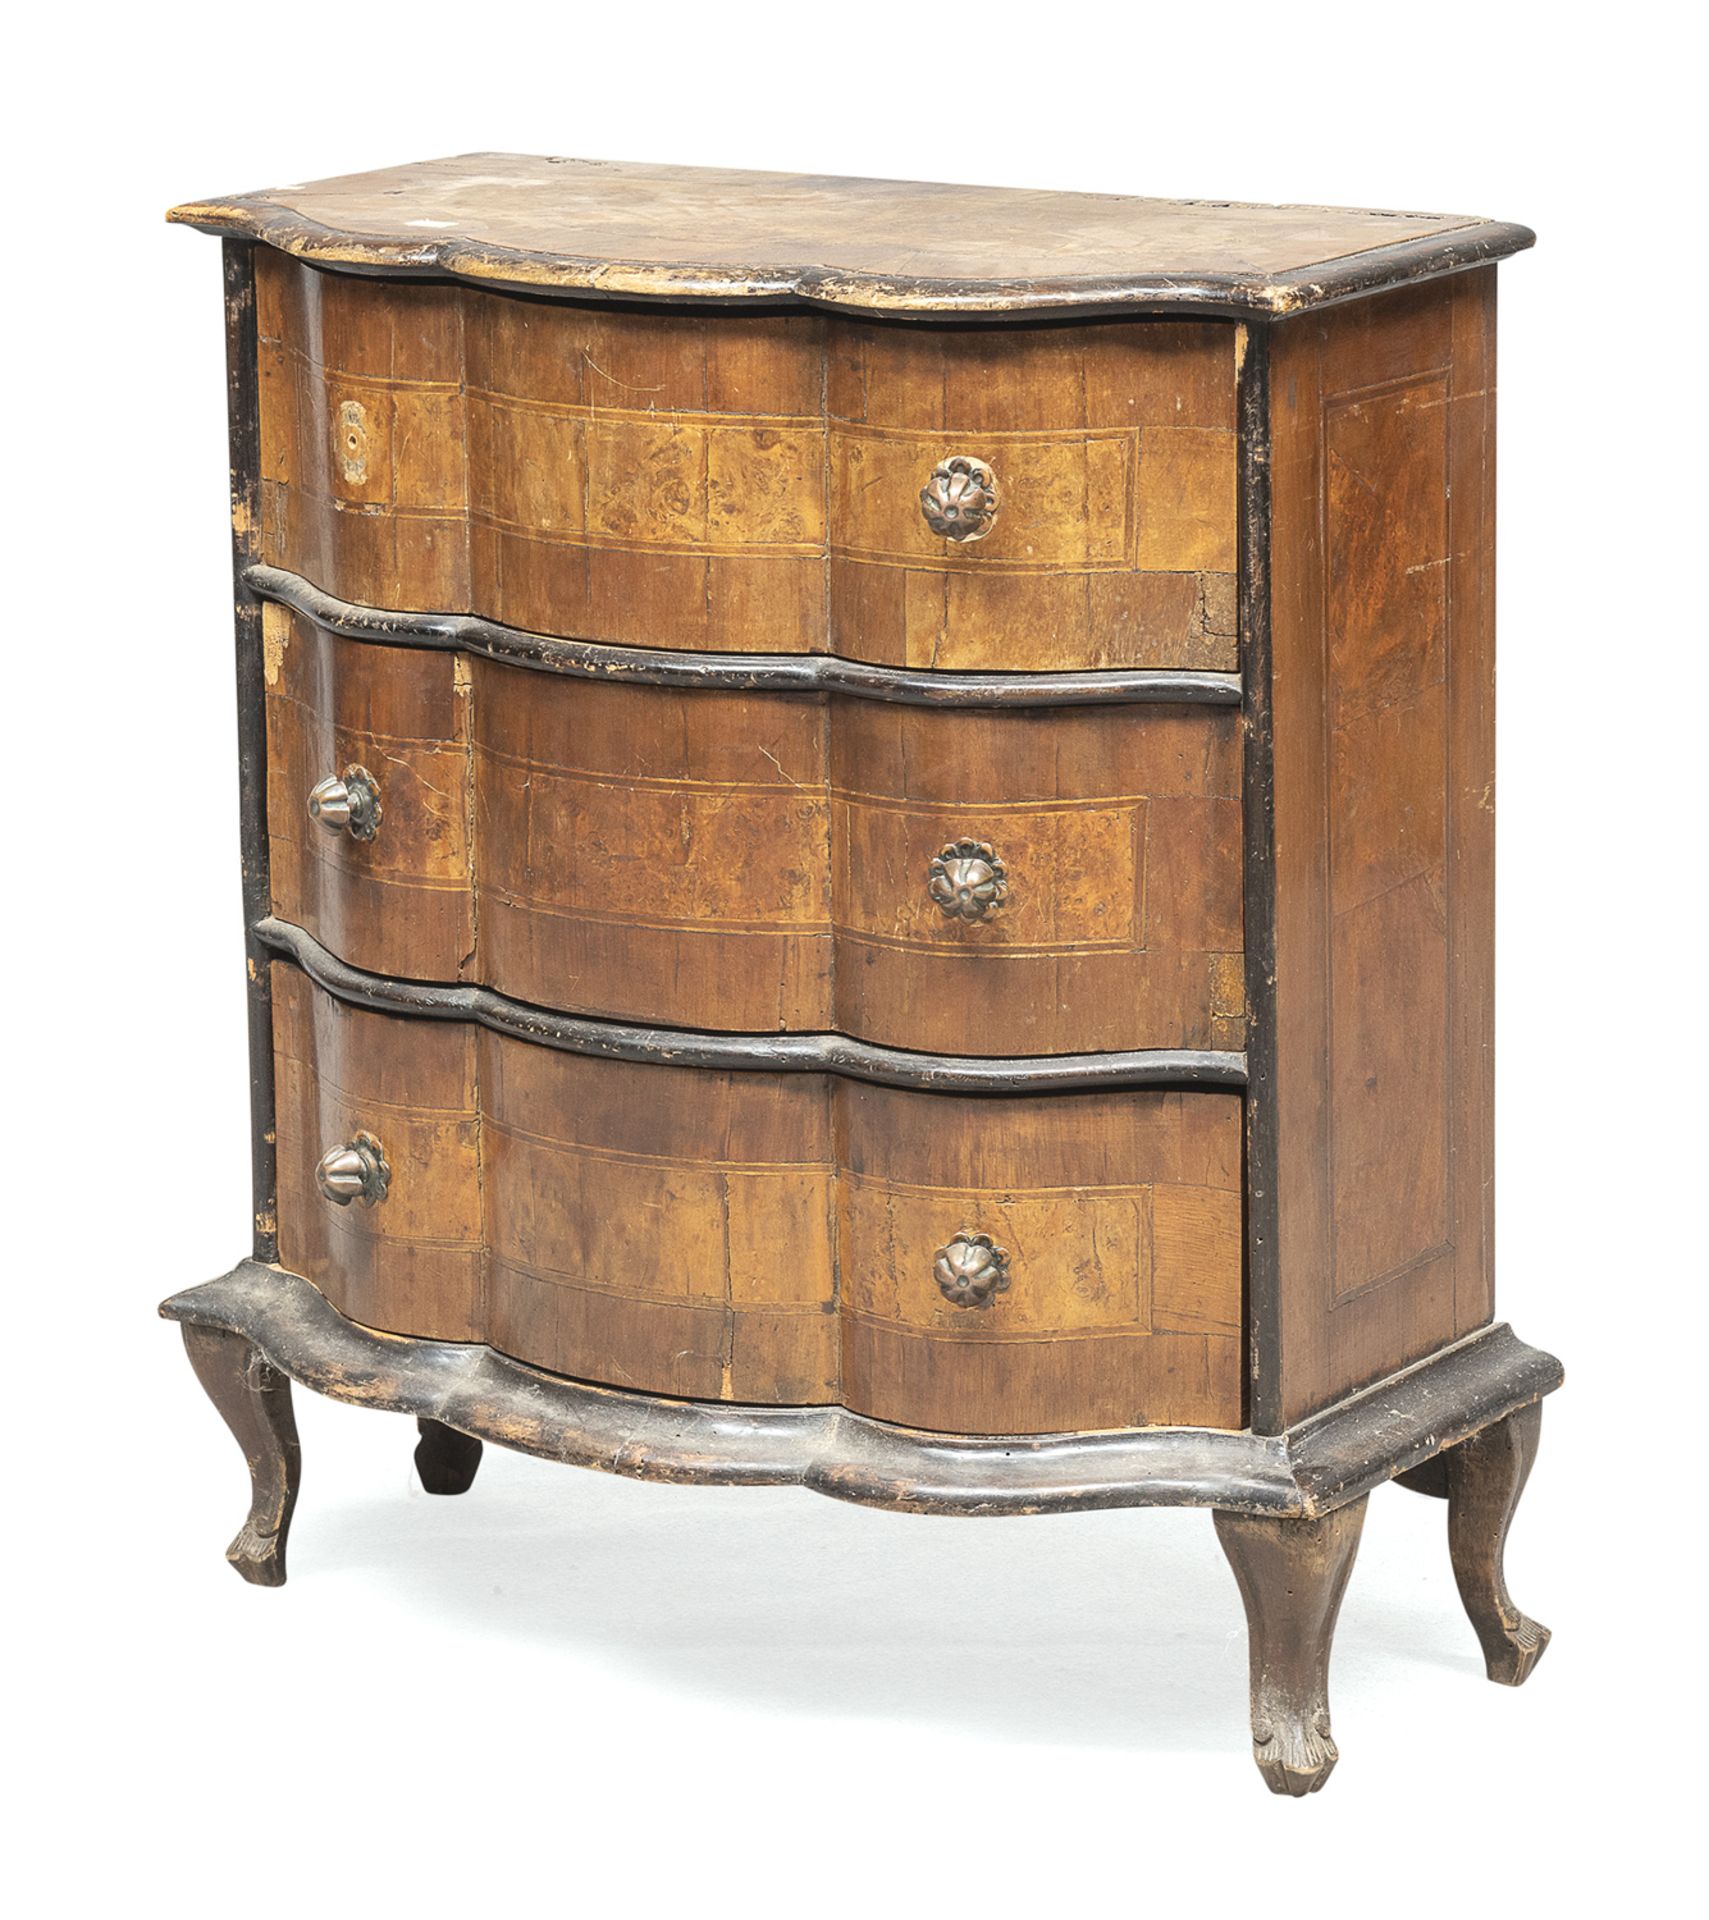 SMALL COMMODE IN WALNUT EMILIA OR LOMBARDY ANCIENT ELEMENTS